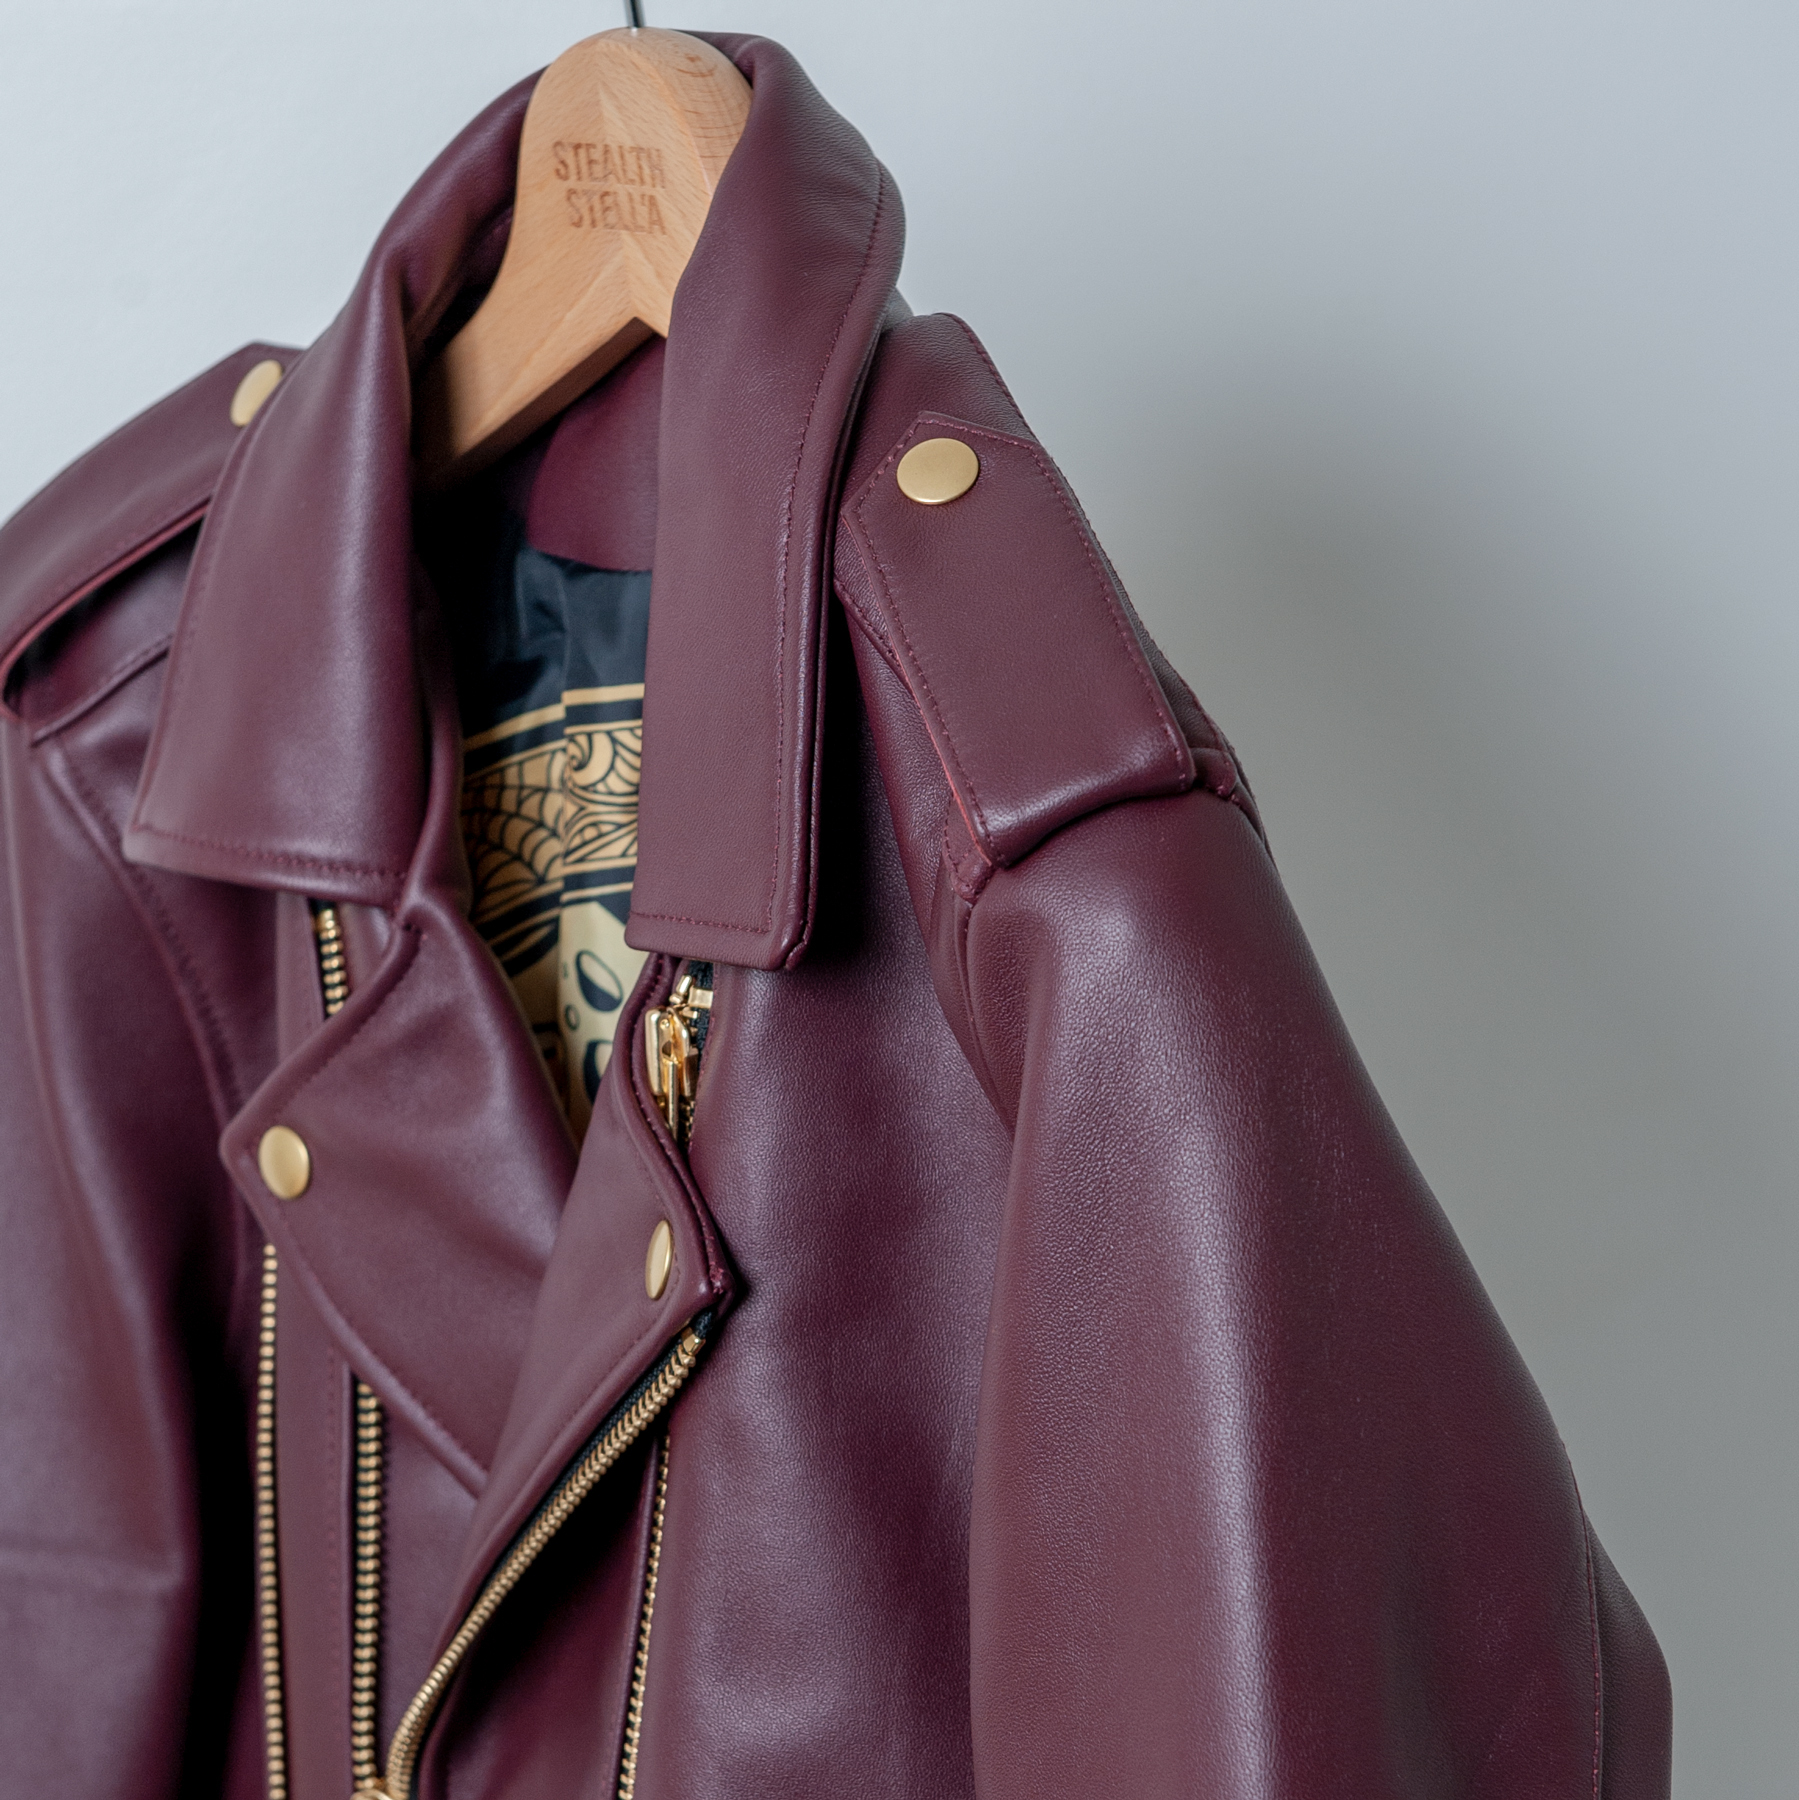 STEALTH STELL'A】SAINT GERMAIN-LEATHER RIDERS COLOR（WINE ...